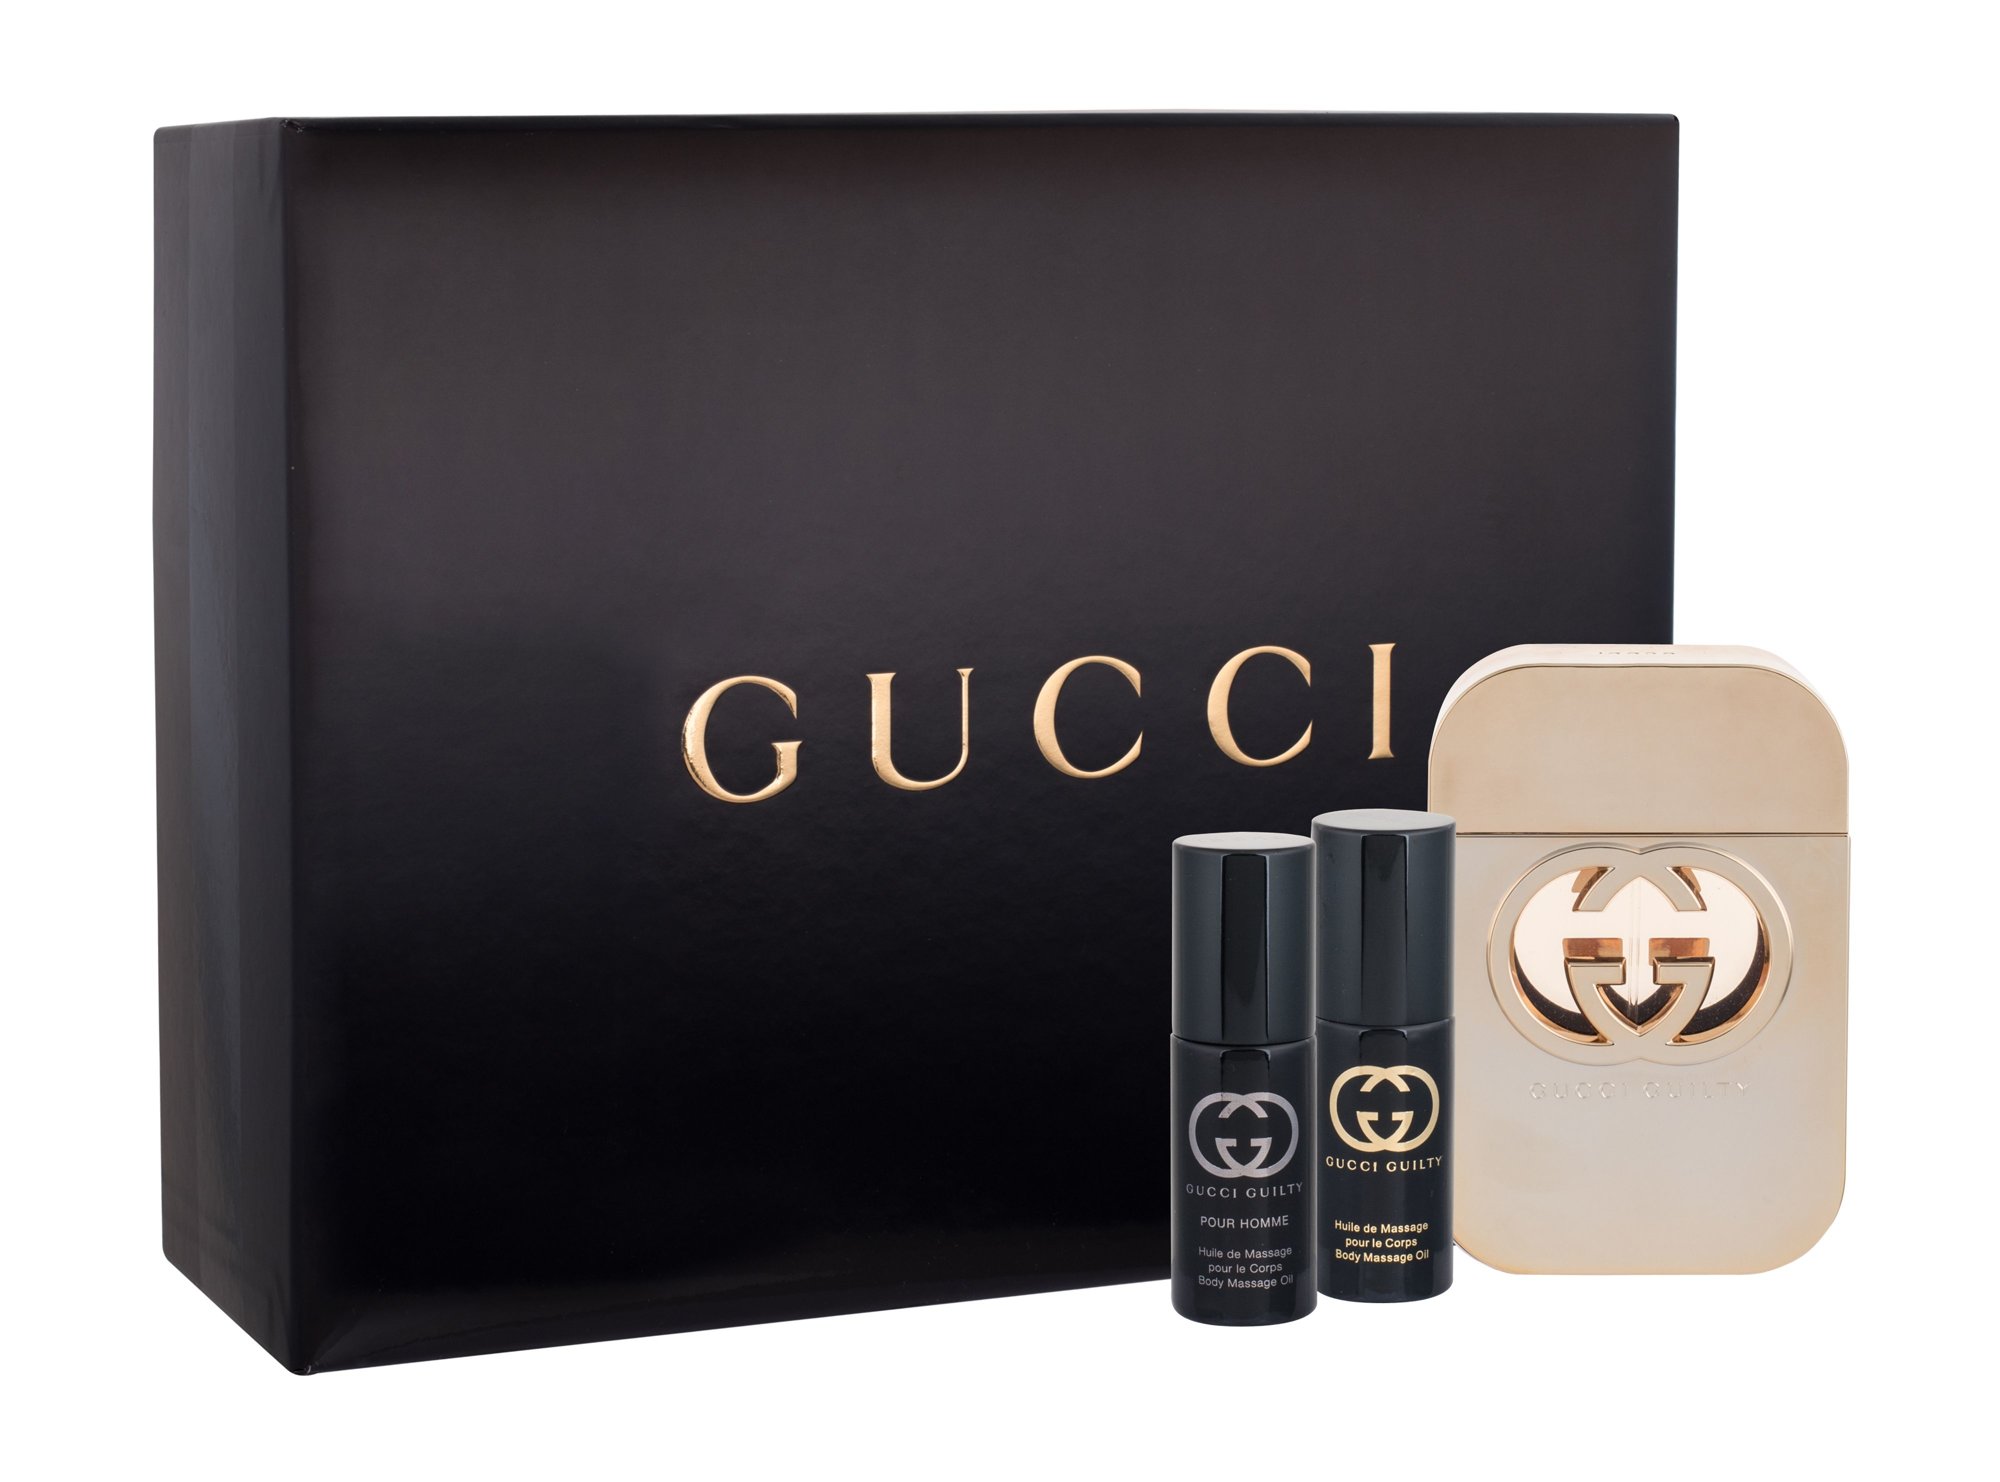 Gucci Guilty 75ml Edt 75ml + 8ml Gucci Guilty massage oil + 8ml Gucci Guilty Pour Homme massage oil Kvepalai Moterims EDT Rinkinys